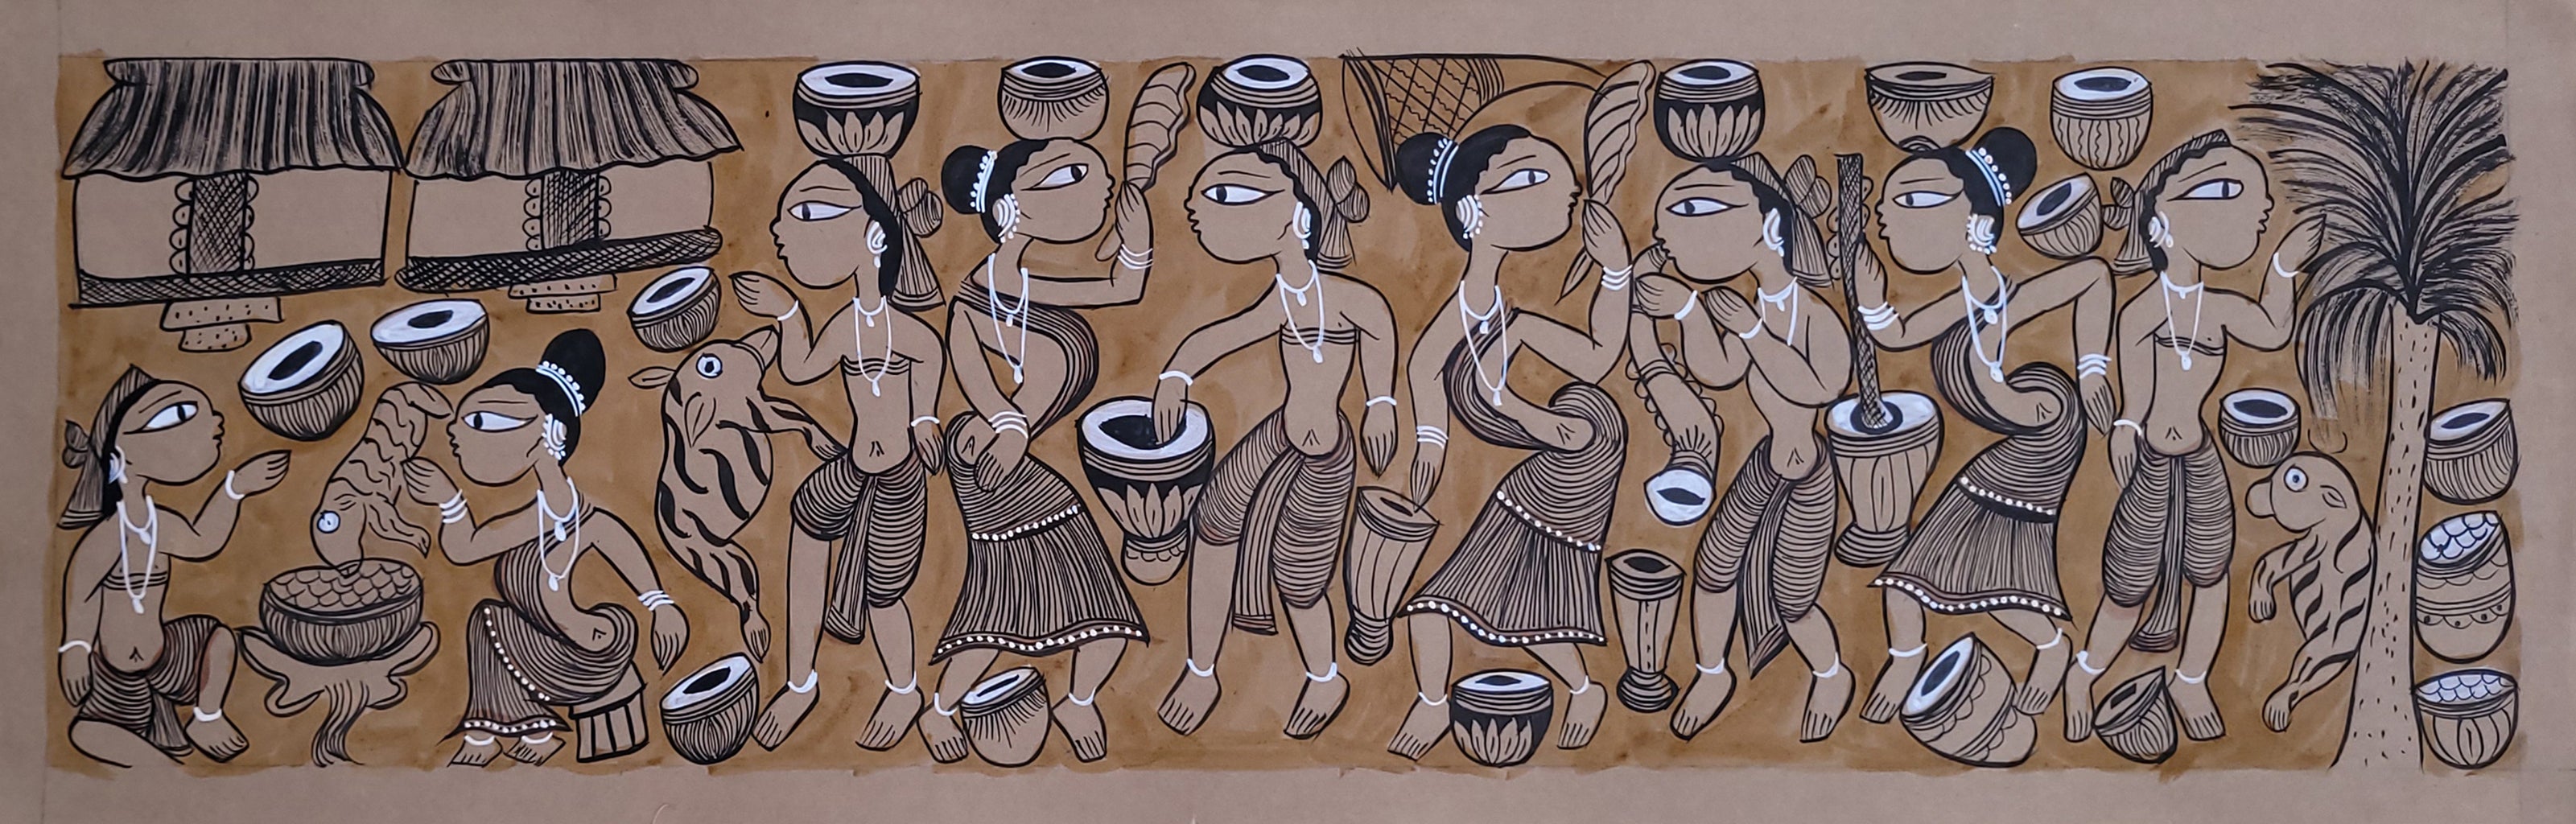 Kalighat paintings from West Bengal